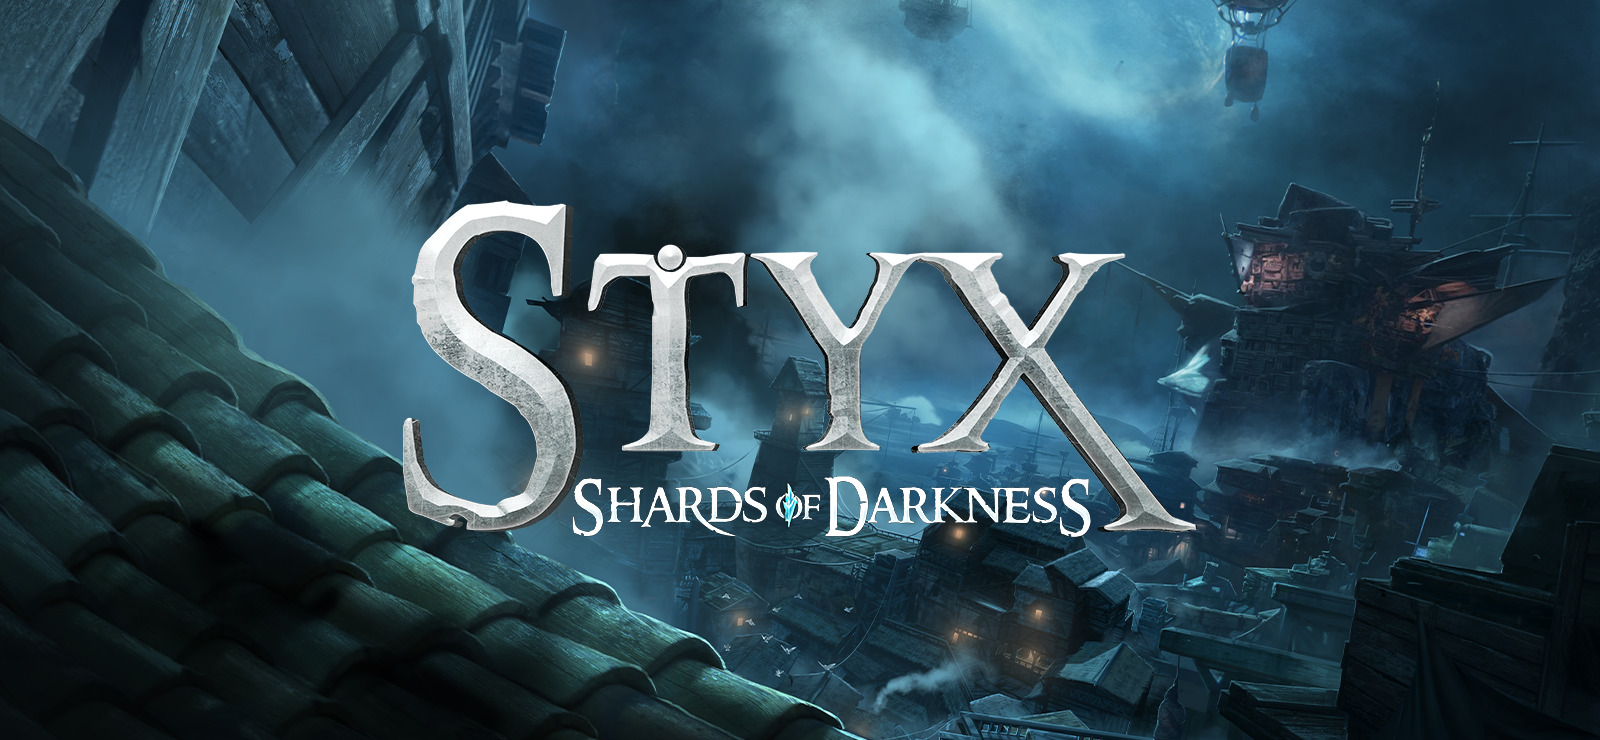 download styx shards of darkness steam for free